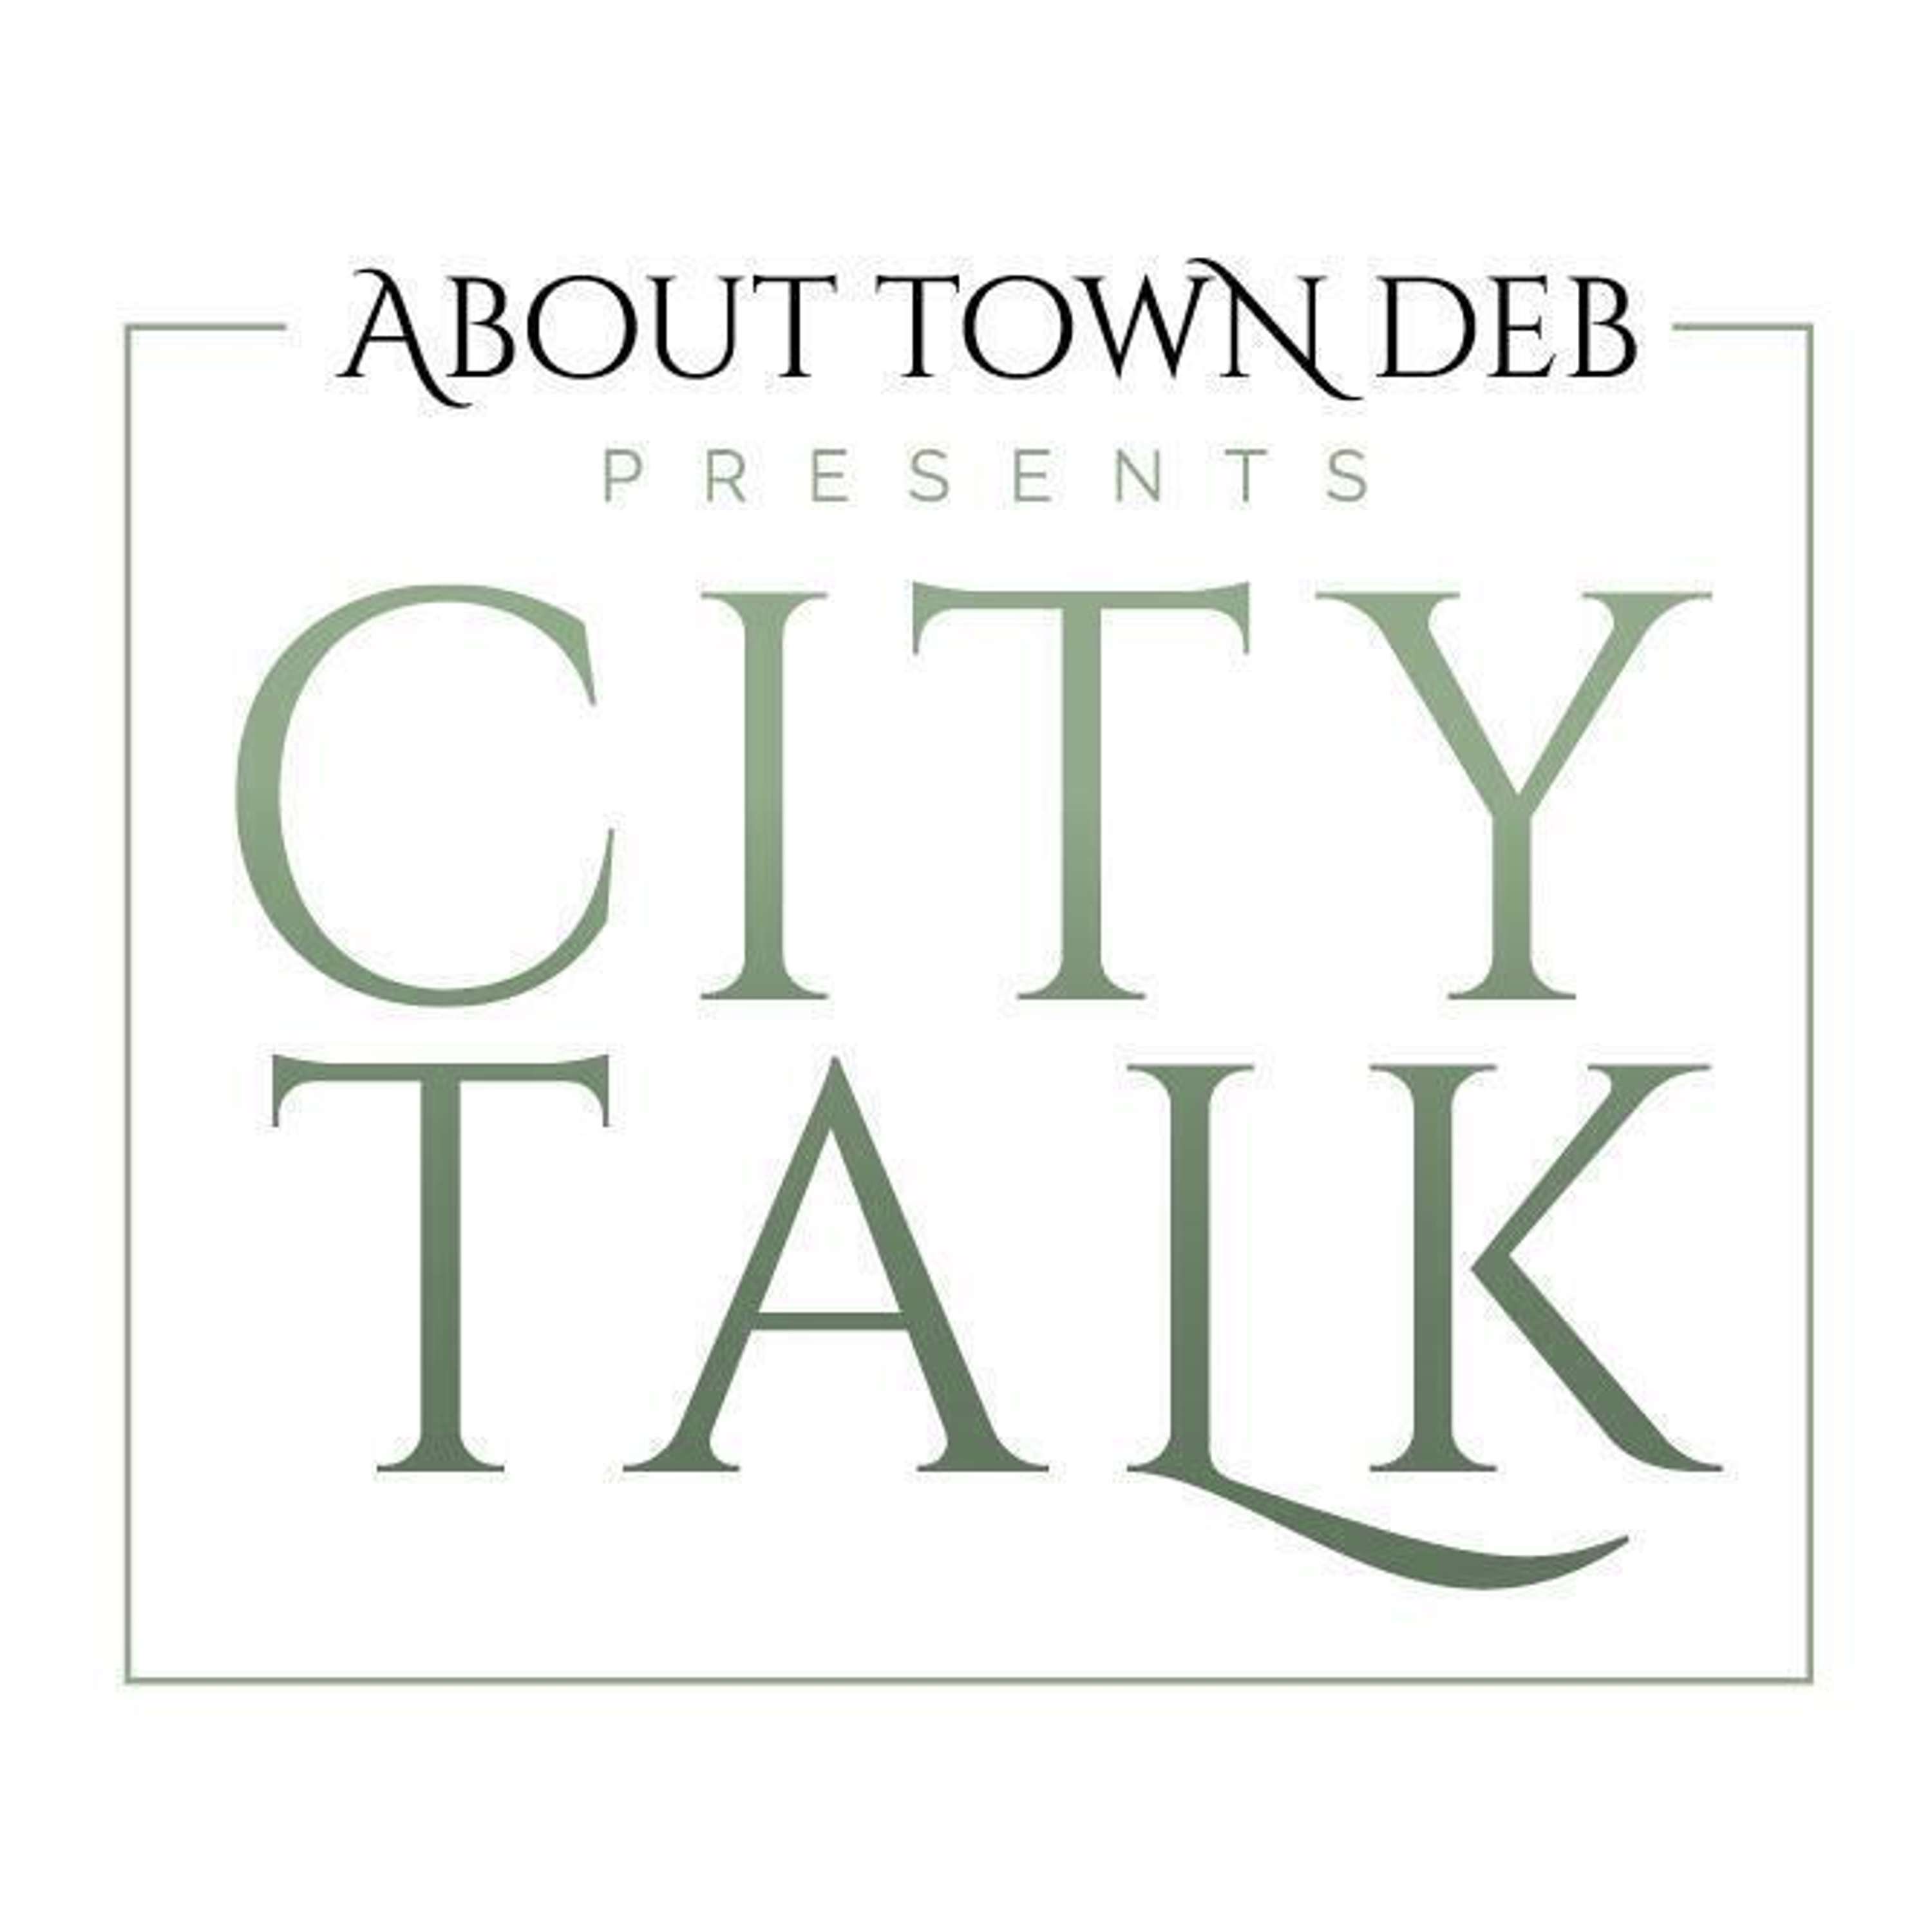 About Town Deb Presents City Talk: Keeping It Real In January with Amber MF Hale (01/04/23)